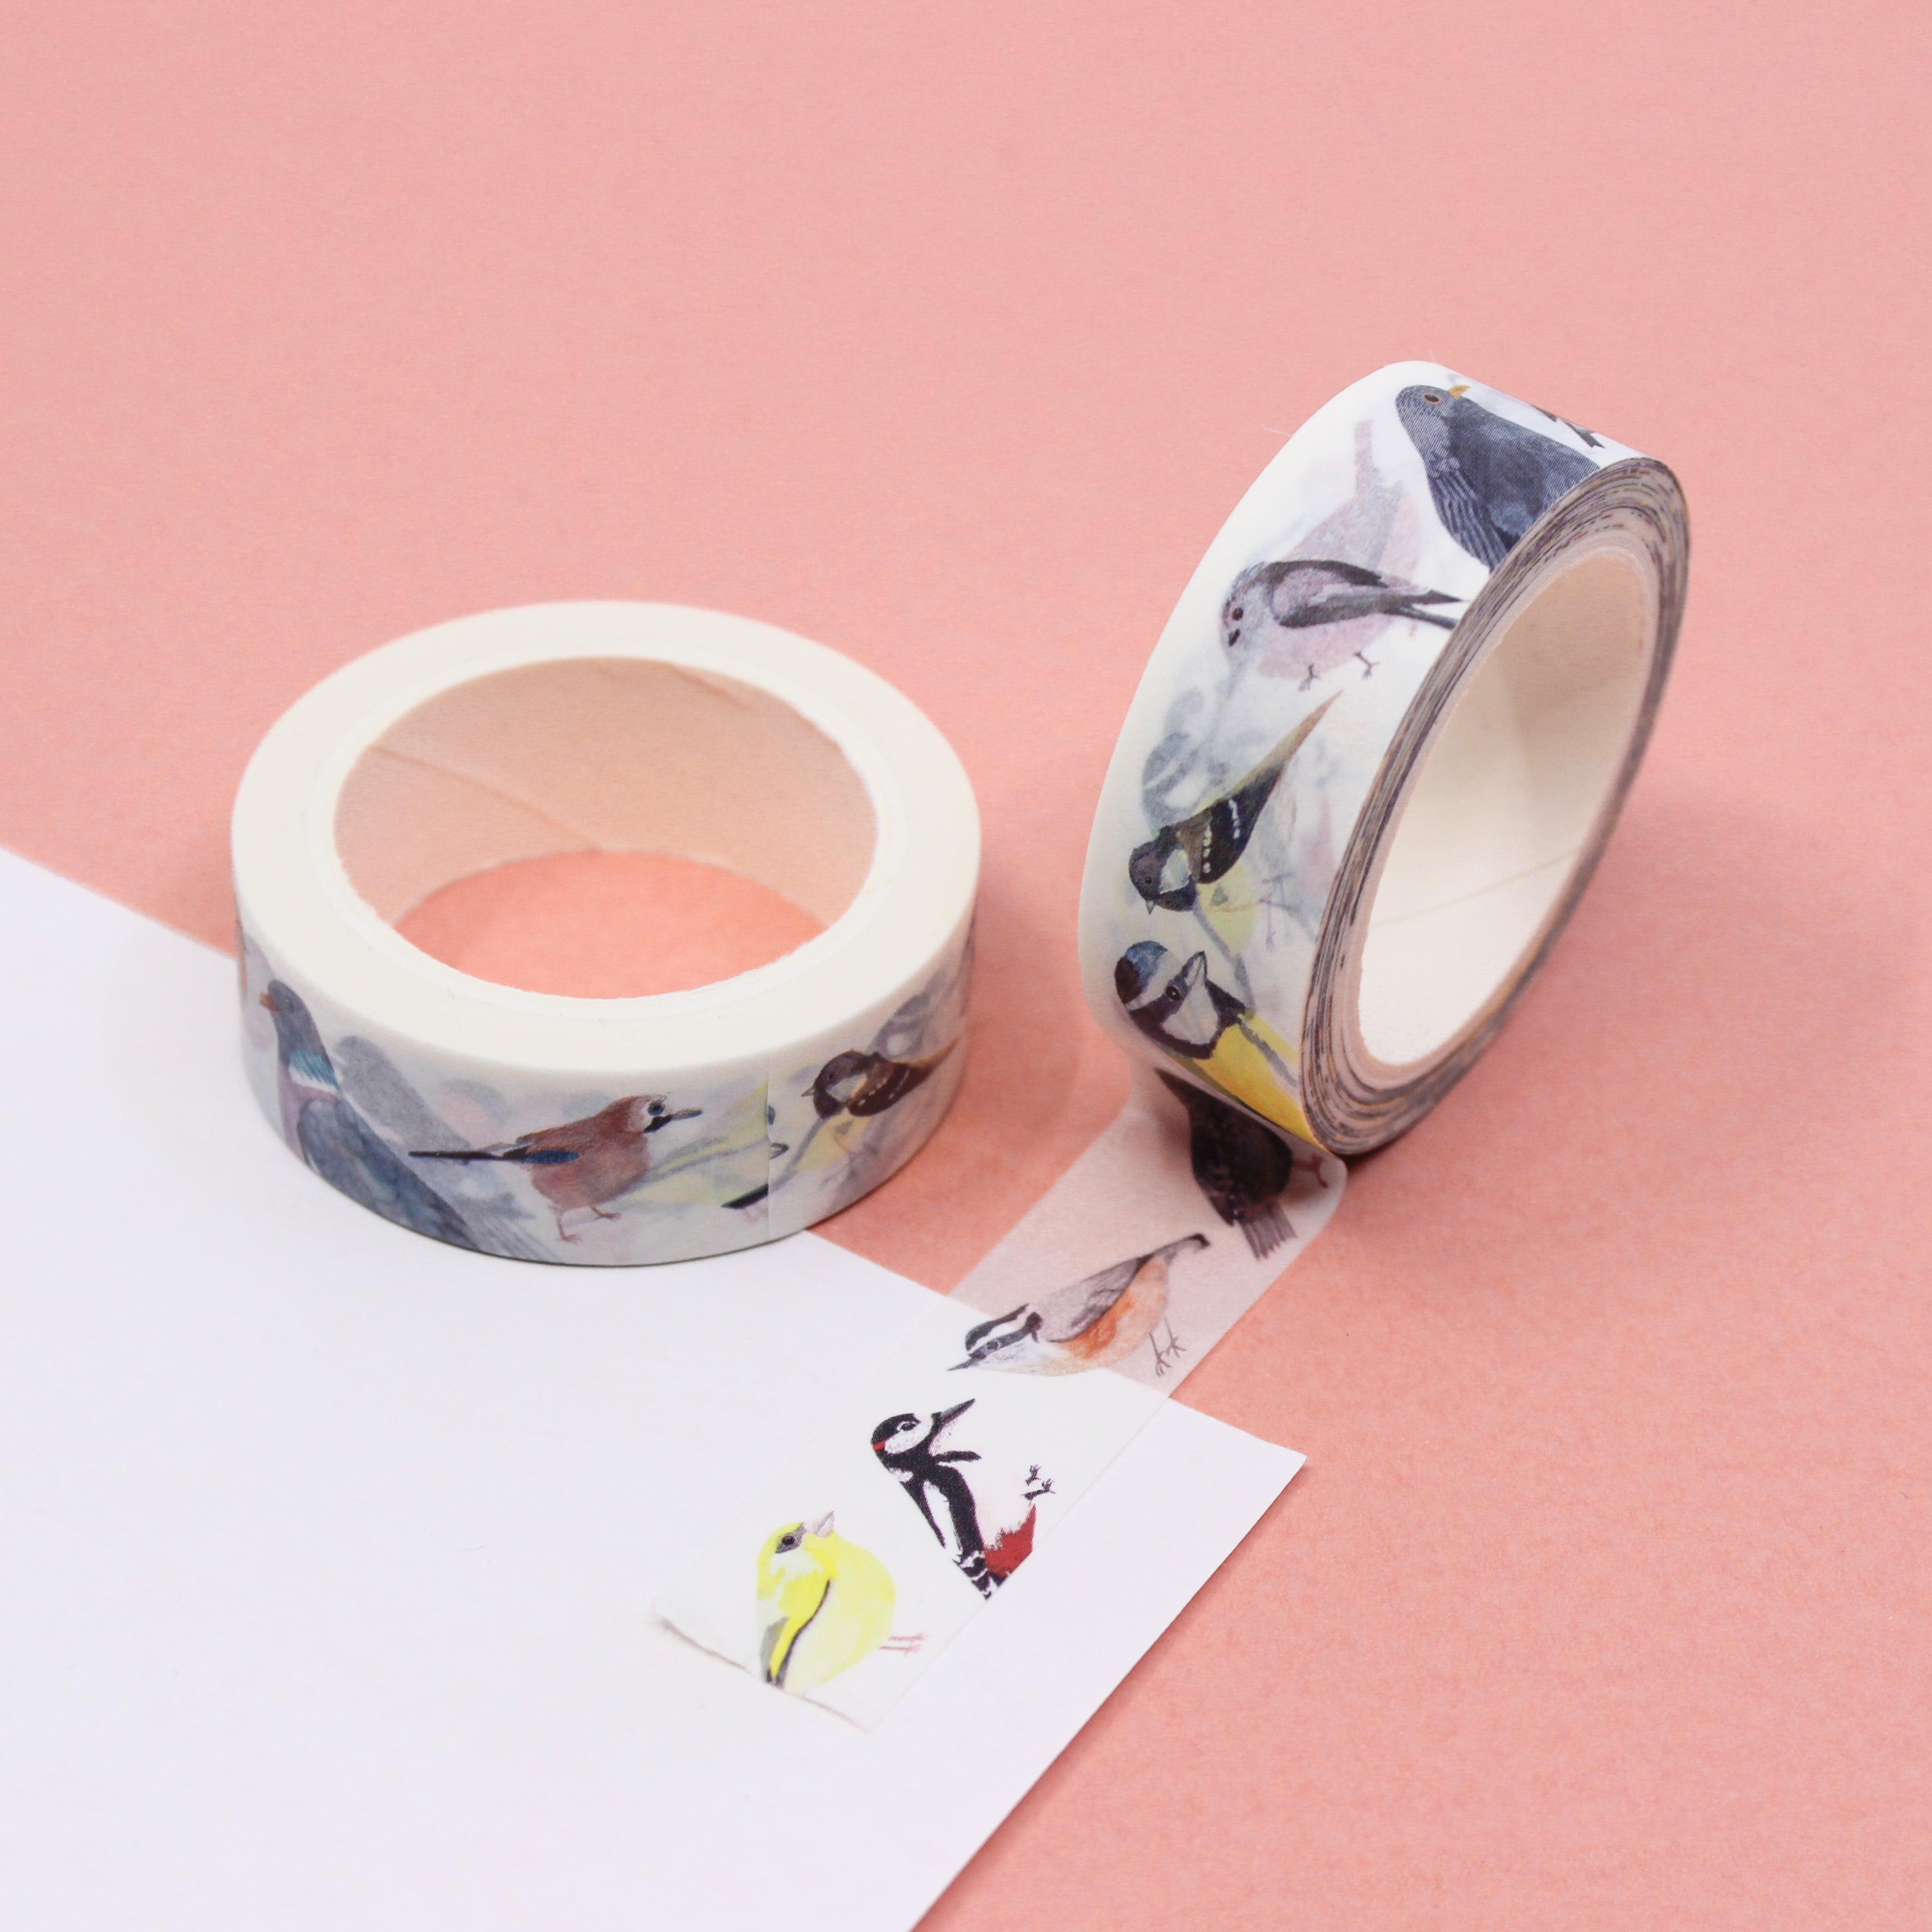 Explore the avian beauty of Britain with our British Birds Washi Tape, adorned with charming illustrations of native bird species. Ideal for adding a touch of ornithological elegance to your projects. This tape is designed by Sarah Francis and sold at BBB Supplies Craft Shop.